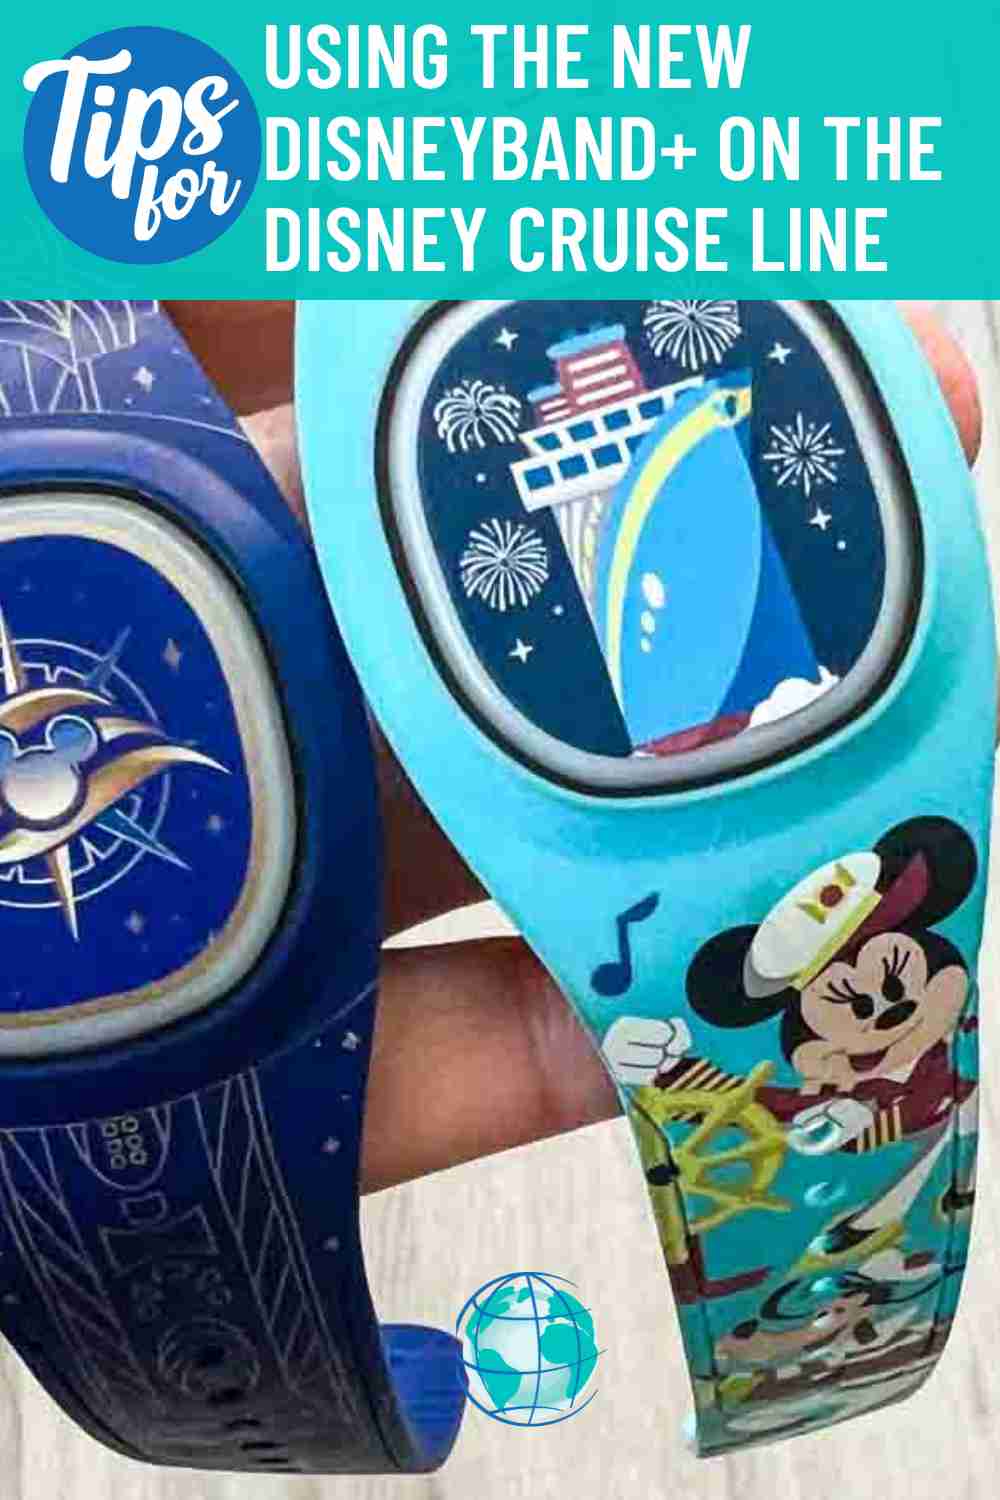 two cruise themed DisneyBand+ bands